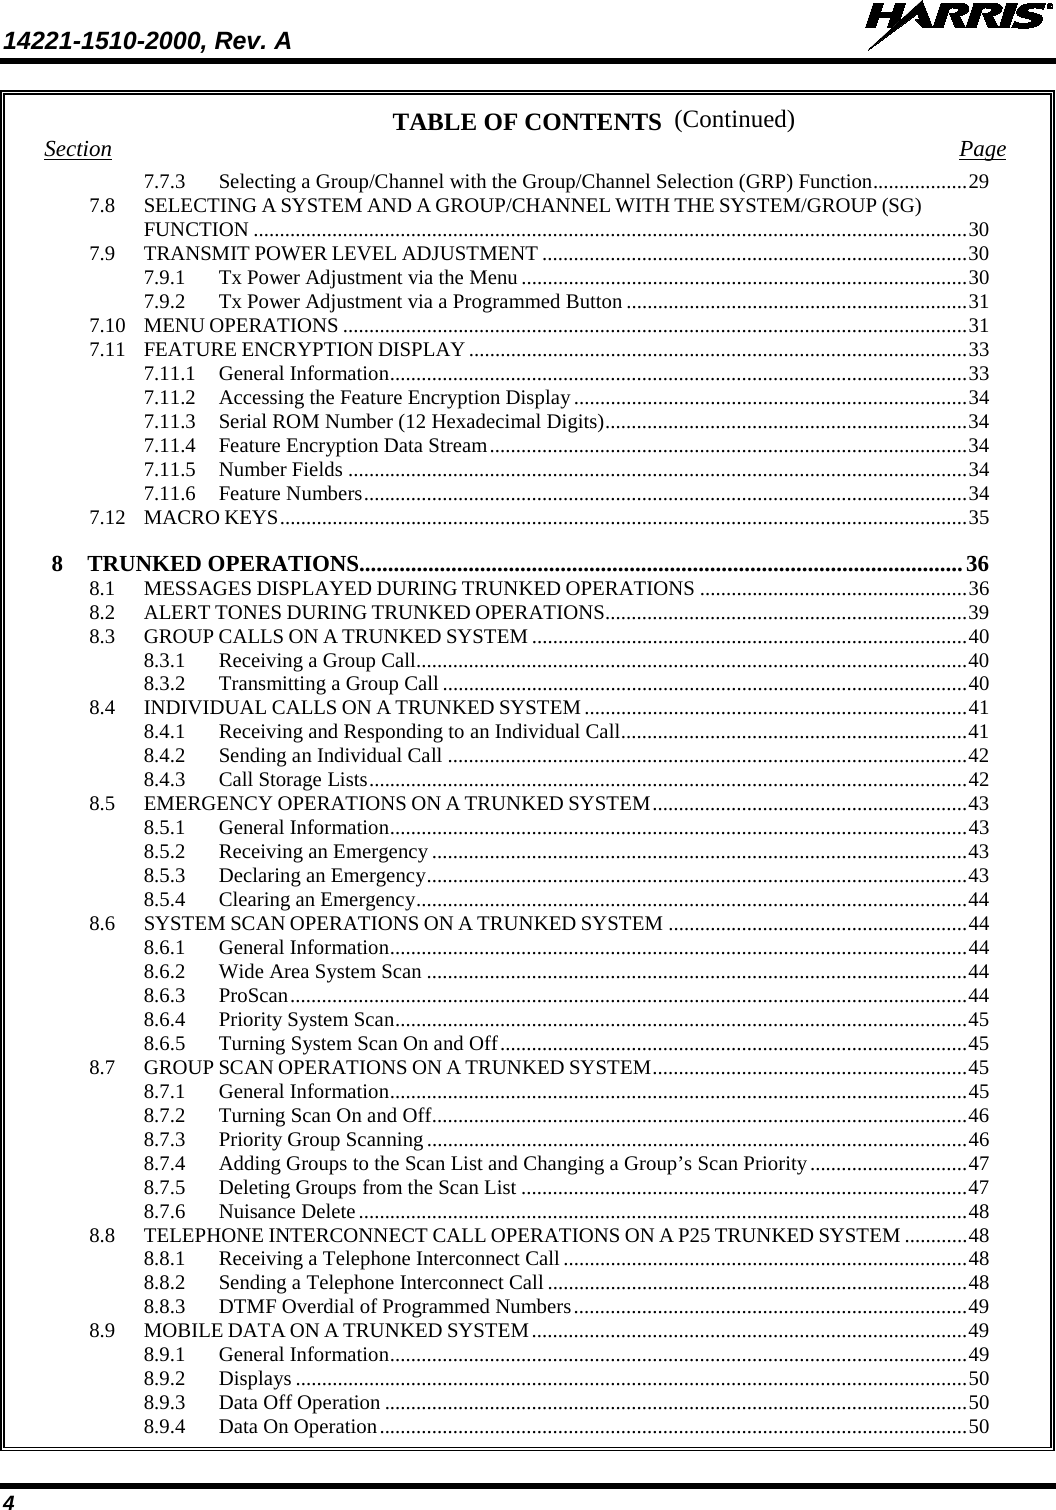 14221-1510-2000, Rev. A   4 (Continued) TABLE OF CONTENTS Section  Page 7.7.3 Selecting a Group/Channel with the Group/Channel Selection (GRP) Function .................. 29 7.8 SELECTING A SYSTEM AND A GROUP/CHANNEL WITH THE SYSTEM/GROUP (SG) FUNCTION ........................................................................................................................................ 30 7.9 TRANSMIT POWER LEVEL ADJUSTMENT ................................................................................. 30 7.9.1 Tx Power Adjustment via the Menu ..................................................................................... 30 7.9.2 Tx Power Adjustment via a Programmed Button ................................................................. 31 7.10 MENU OPERATIONS ....................................................................................................................... 31 7.11 FEATURE ENCRYPTION DISPLAY ............................................................................................... 33 7.11.1 General Information .............................................................................................................. 33 7.11.2 Accessing the Feature Encryption Display ........................................................................... 34 7.11.3 Serial ROM Number (12 Hexadecimal Digits) ..................................................................... 34 7.11.4 Feature Encryption Data Stream ........................................................................................... 34 7.11.5 Number Fields ...................................................................................................................... 34 7.11.6 Feature Numbers ................................................................................................................... 34 7.12 MACRO KEYS ................................................................................................................................... 35 8 TRUNKED OPERATIONS......................................................................................................... 36 8.1 MESSAGES DISPLAYED DURING TRUNKED OPERATIONS ................................................... 36 8.2 ALERT TONES DURING TRUNKED OPERATIONS ..................................................................... 39 8.3 GROUP CALLS ON A TRUNKED SYSTEM ................................................................................... 40 8.3.1 Receiving a Group Call ......................................................................................................... 40 8.3.2 Transmitting a Group Call .................................................................................................... 40 8.4 INDIVIDUAL CALLS ON A TRUNKED SYSTEM ......................................................................... 41 8.4.1 Receiving and Responding to an Individual Call .................................................................. 41 8.4.2 Sending an Individual Call ................................................................................................... 42 8.4.3 Call Storage Lists .................................................................................................................. 42 8.5 EMERGENCY OPERATIONS ON A TRUNKED SYSTEM ............................................................ 43 8.5.1 General Information .............................................................................................................. 43 8.5.2 Receiving an Emergency ...................................................................................................... 43 8.5.3 Declaring an Emergency ....................................................................................................... 43 8.5.4 Clearing an Emergency ......................................................................................................... 44 8.6 SYSTEM SCAN OPERATIONS ON A TRUNKED SYSTEM ......................................................... 44 8.6.1 General Information .............................................................................................................. 44 8.6.2 Wide Area System Scan ....................................................................................................... 44 8.6.3 ProScan ................................................................................................................................. 44 8.6.4 Priority System Scan ............................................................................................................. 45 8.6.5 Turning System Scan On and Off ......................................................................................... 45 8.7 GROUP SCAN OPERATIONS ON A TRUNKED SYSTEM ............................................................ 45 8.7.1 General Information .............................................................................................................. 45 8.7.2 Turning Scan On and Off ...................................................................................................... 46 8.7.3 Priority Group Scanning ....................................................................................................... 46 8.7.4 Adding Groups to the Scan List and Changing a Group’s Scan Priority .............................. 47 8.7.5 Deleting Groups from the Scan List ..................................................................................... 47 8.7.6 Nuisance Delete .................................................................................................................... 48 8.8 TELEPHONE INTERCONNECT CALL OPERATIONS ON A P25 TRUNKED SYSTEM ............ 48 8.8.1 Receiving a Telephone Interconnect Call ............................................................................. 48 8.8.2 Sending a Telephone Interconnect Call ................................................................................ 48 8.8.3 DTMF Overdial of Programmed Numbers ........................................................................... 49 8.9 MOBILE DATA ON A TRUNKED SYSTEM ................................................................................... 49 8.9.1 General Information .............................................................................................................. 49 8.9.2 Displays ................................................................................................................................ 50 8.9.3 Data Off Operation ............................................................................................................... 50 8.9.4 Data On Operation ................................................................................................................ 50 